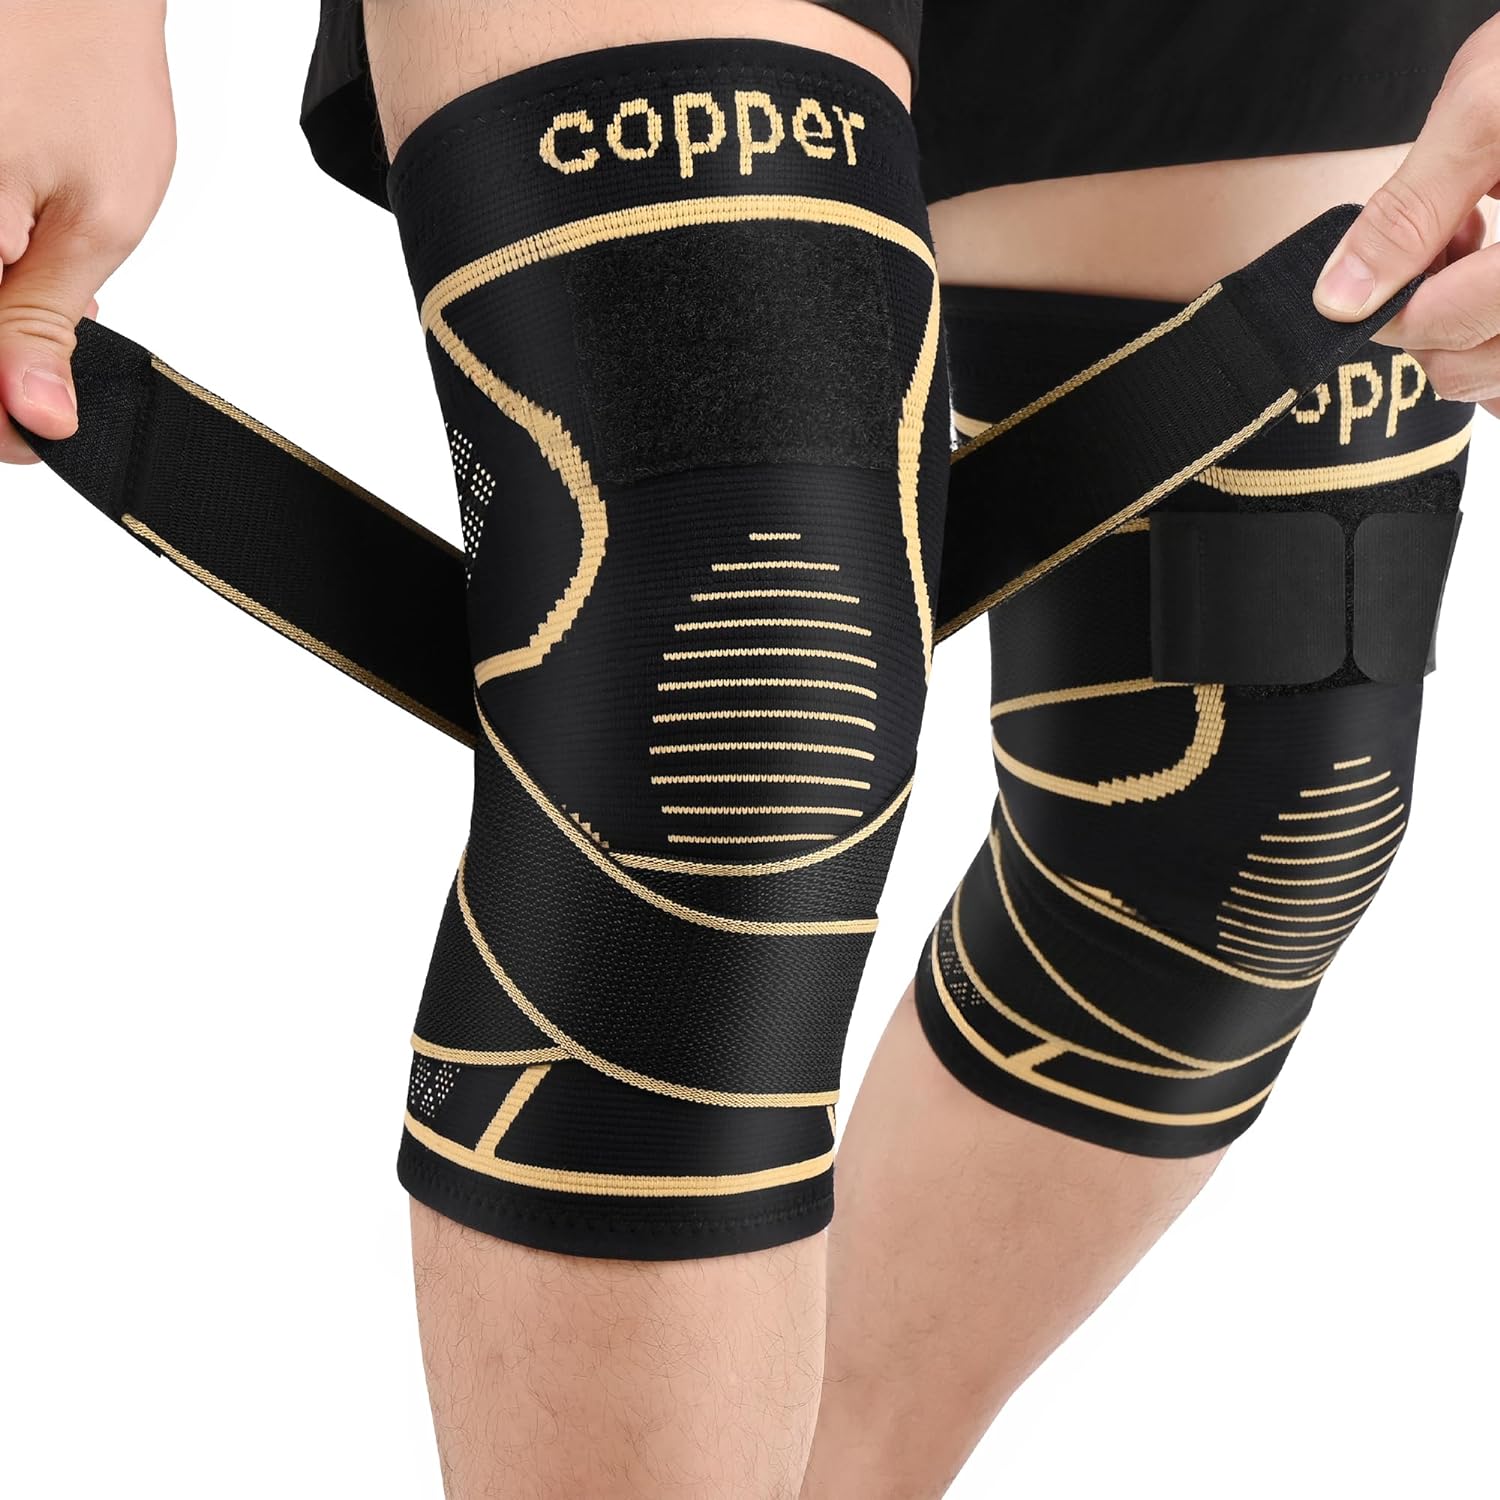 JHVW Copper Knee Braces with Strap for Knee Pain(2 pack)- Knee Compression Sleeve Support for Men Women,Arthritis,Working Out